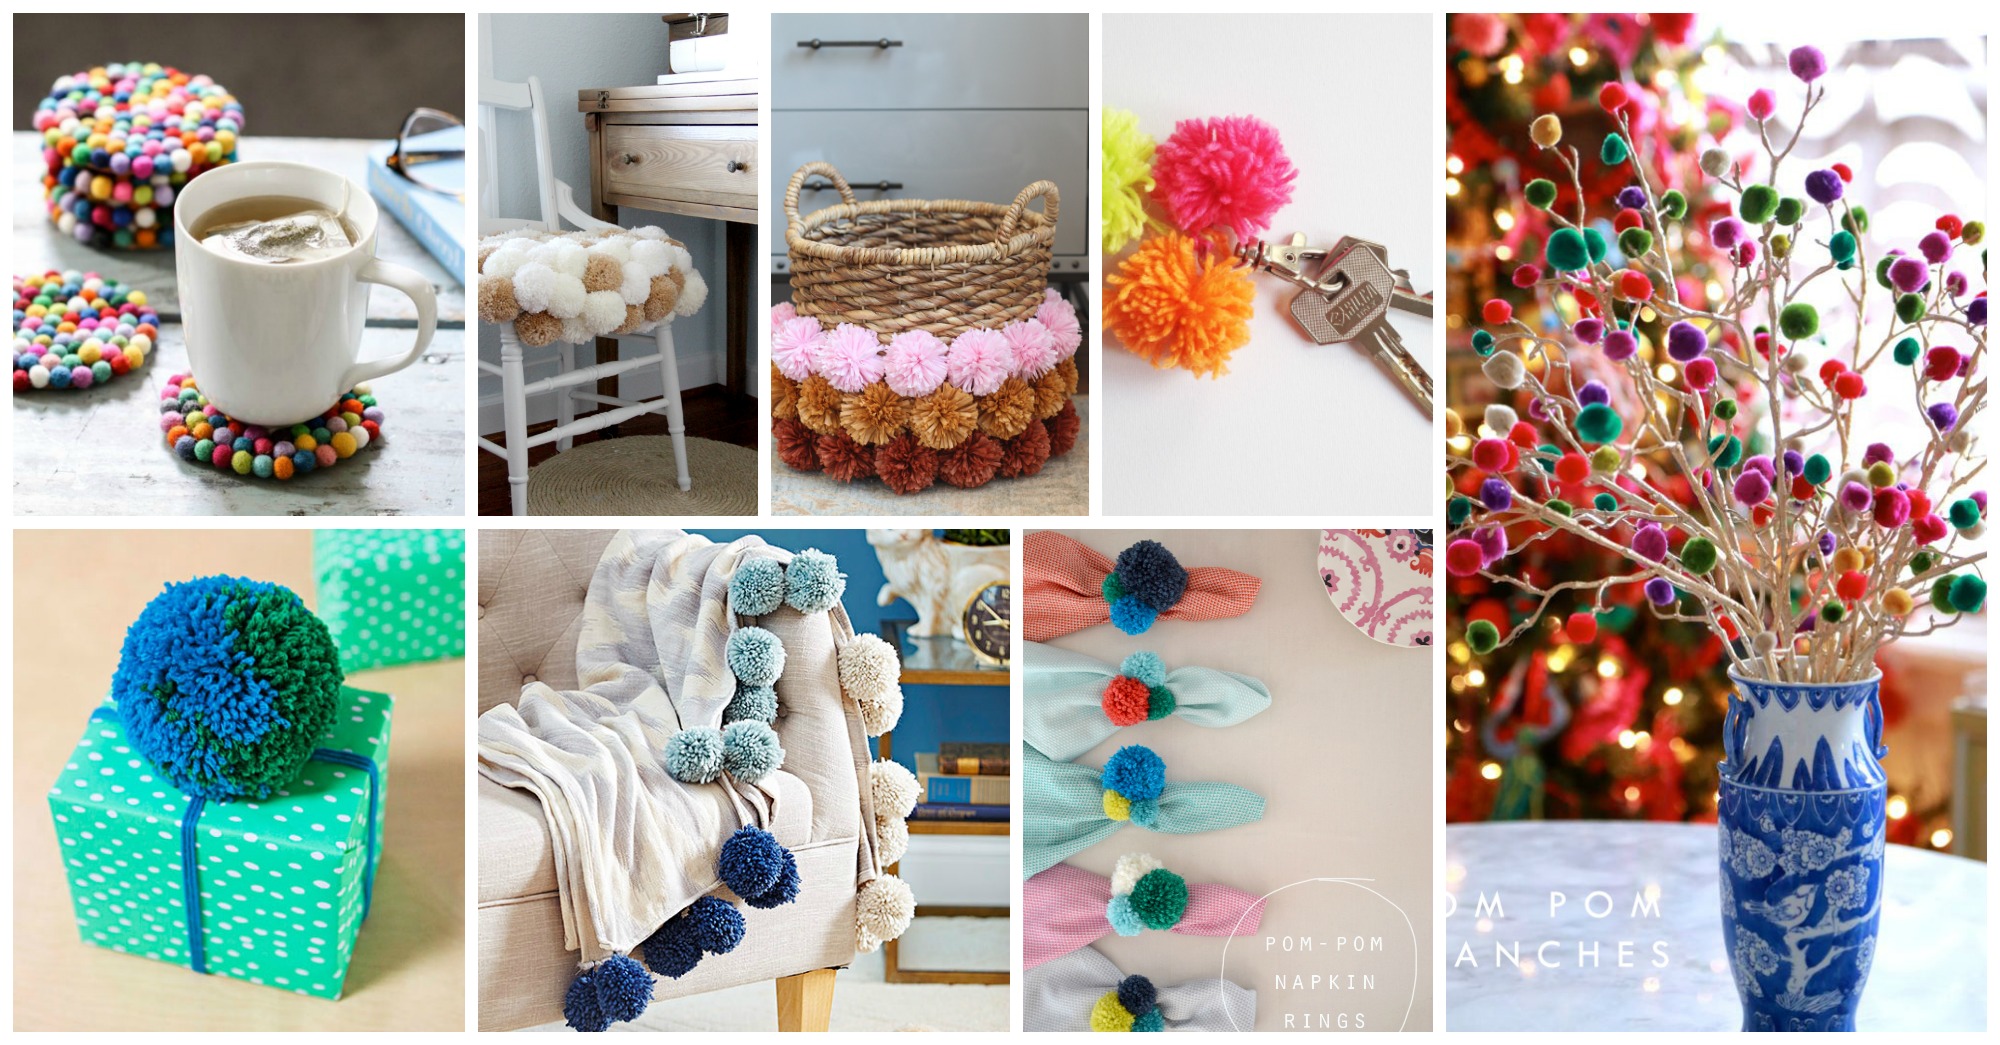 ulv udgør gennemse 15 Cute DIY Pom Pom Projects to Make Right Now